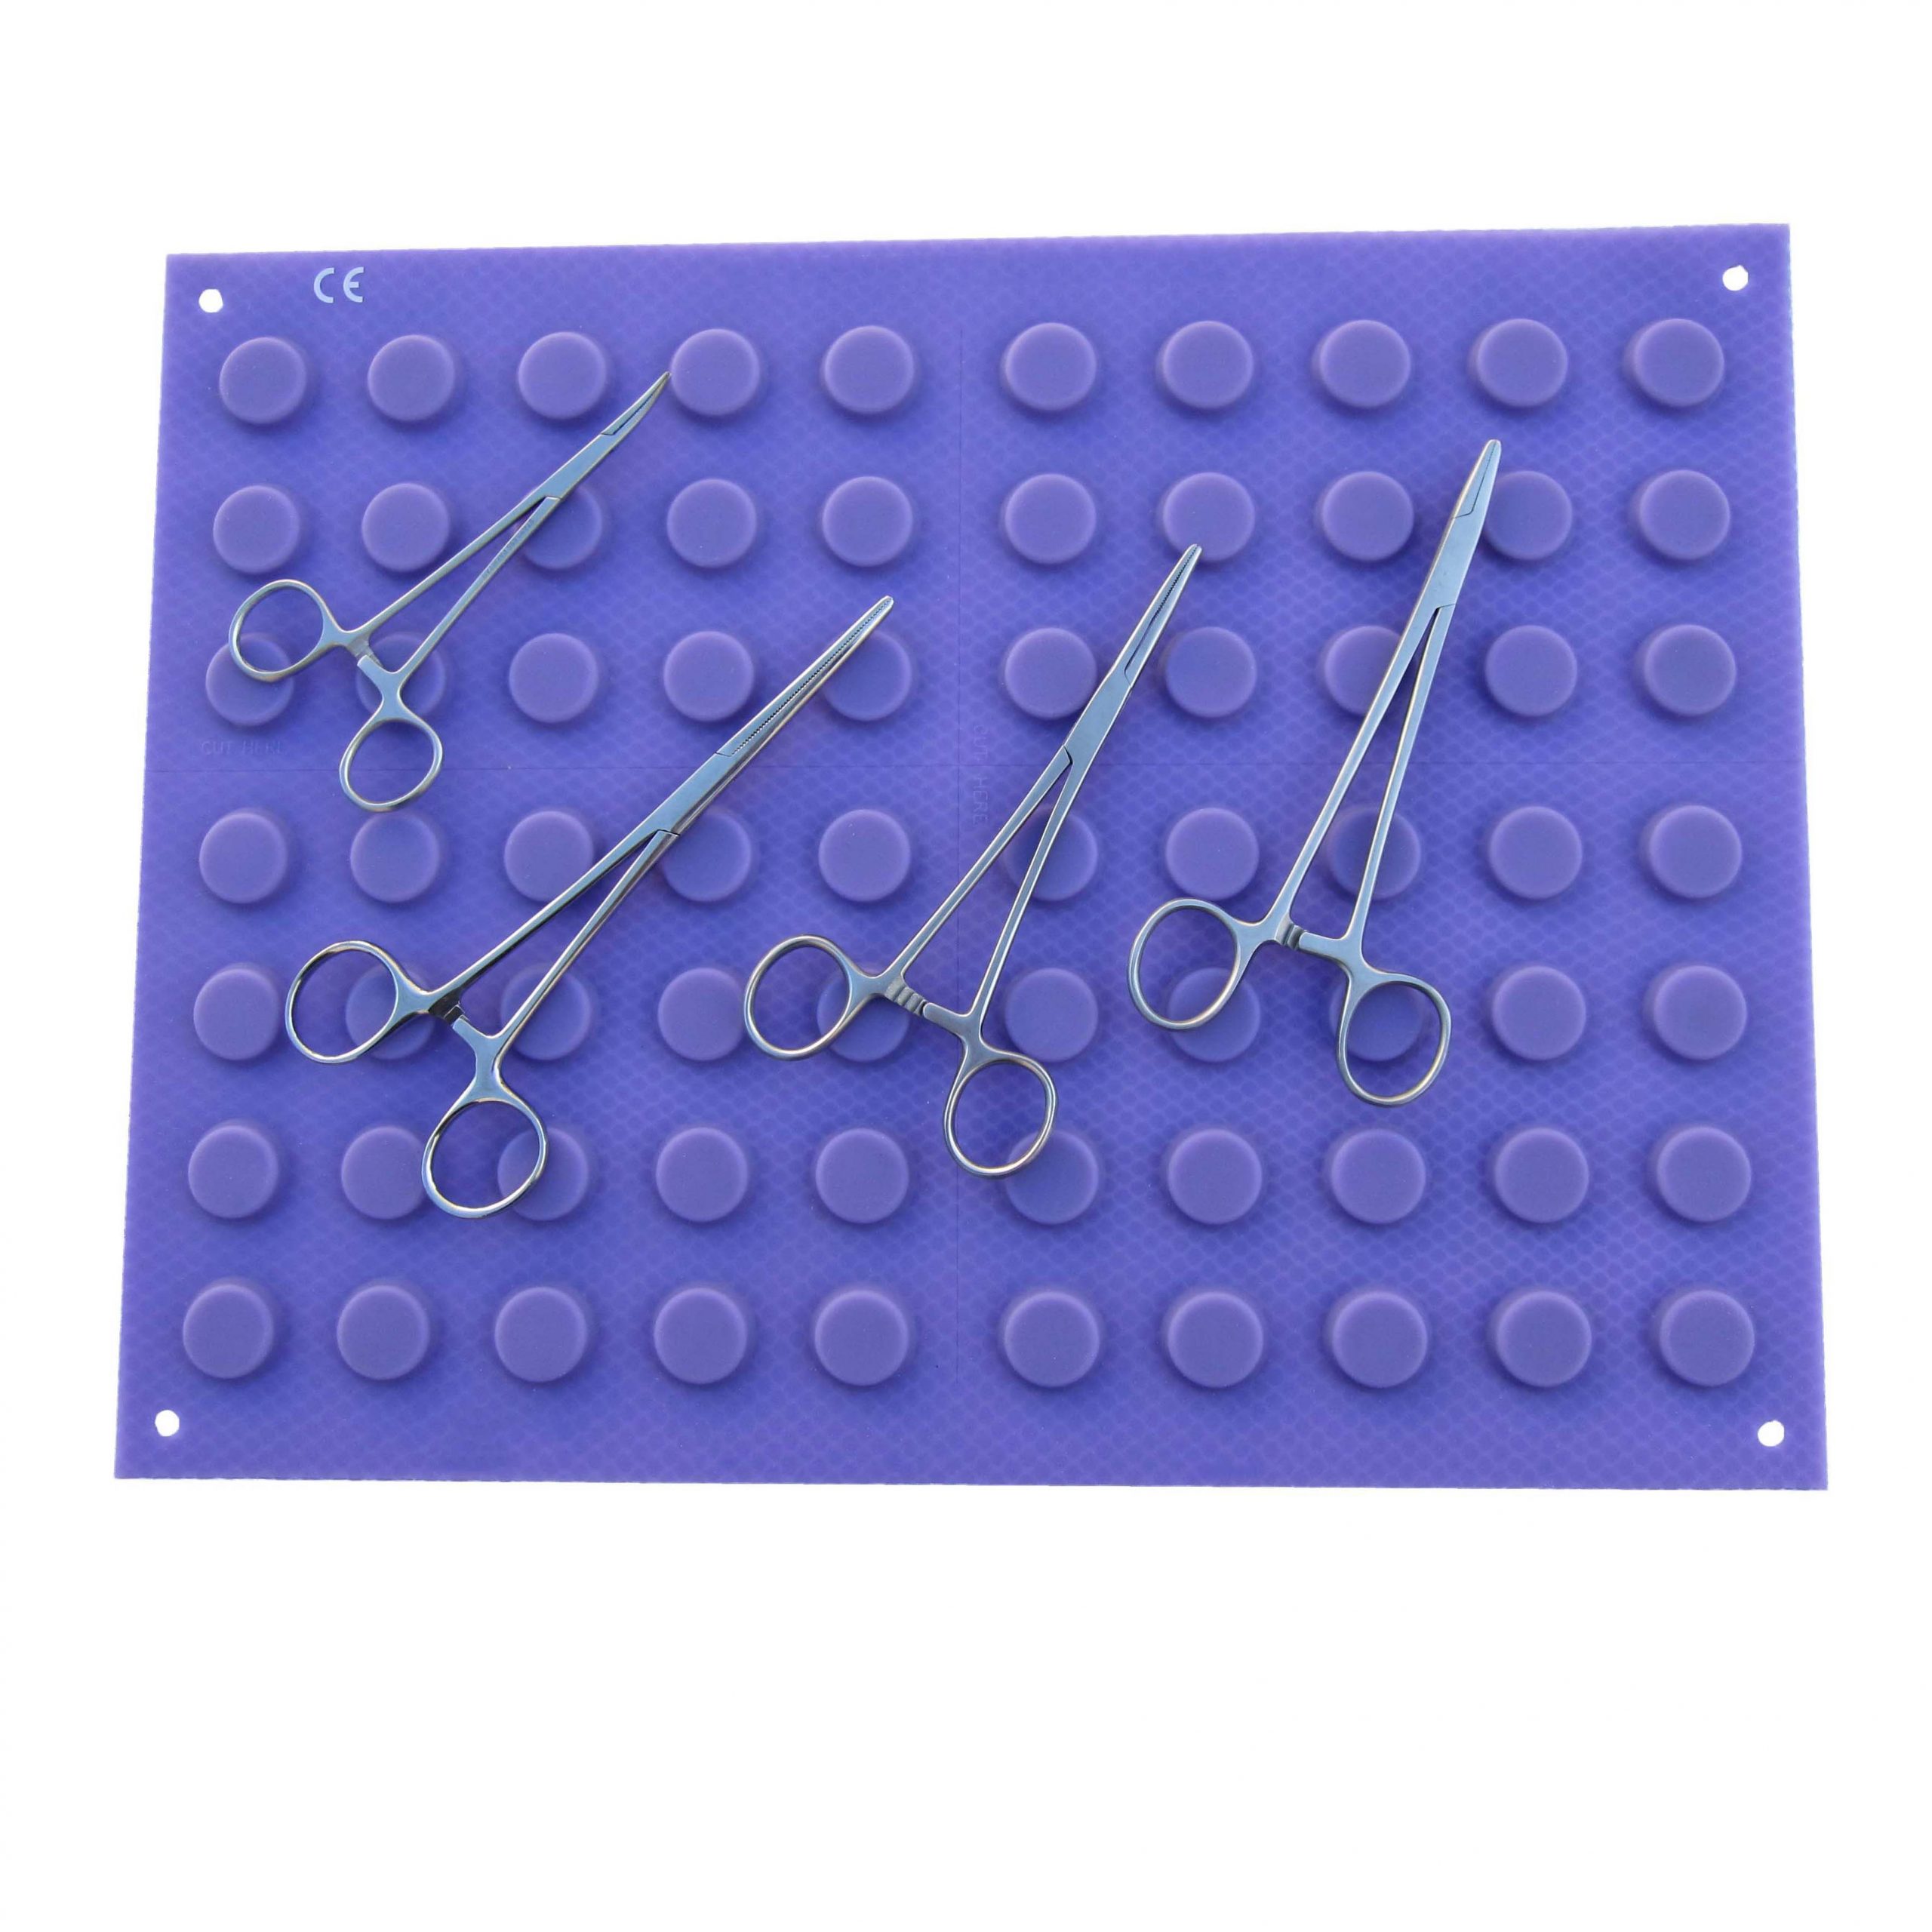 Cutting Edge - Magnetic MAT, 12x 17, Blue, Raised Magnets to Instrument  Firmly, Round Magnets to Avoid Silicone Rubber Perforations, Flexible and